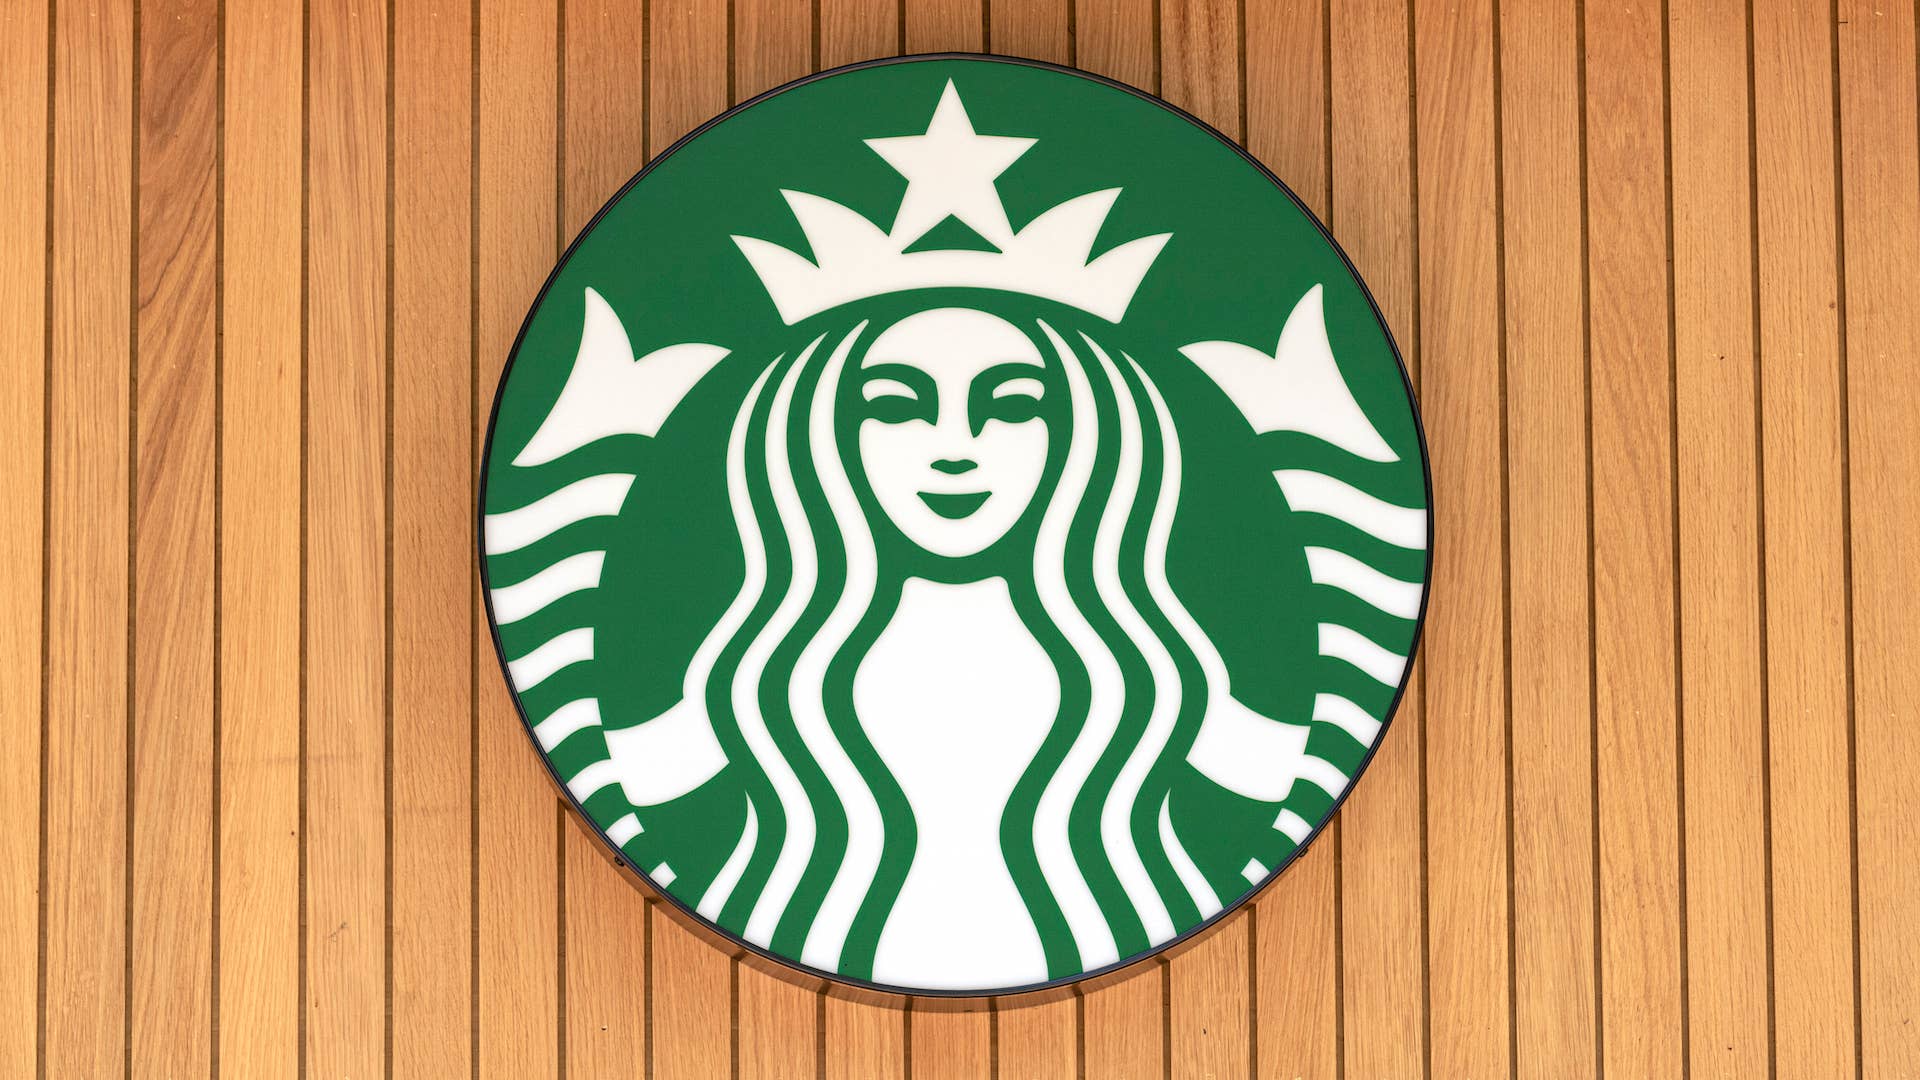 Starbucks logo seen on one of their branches